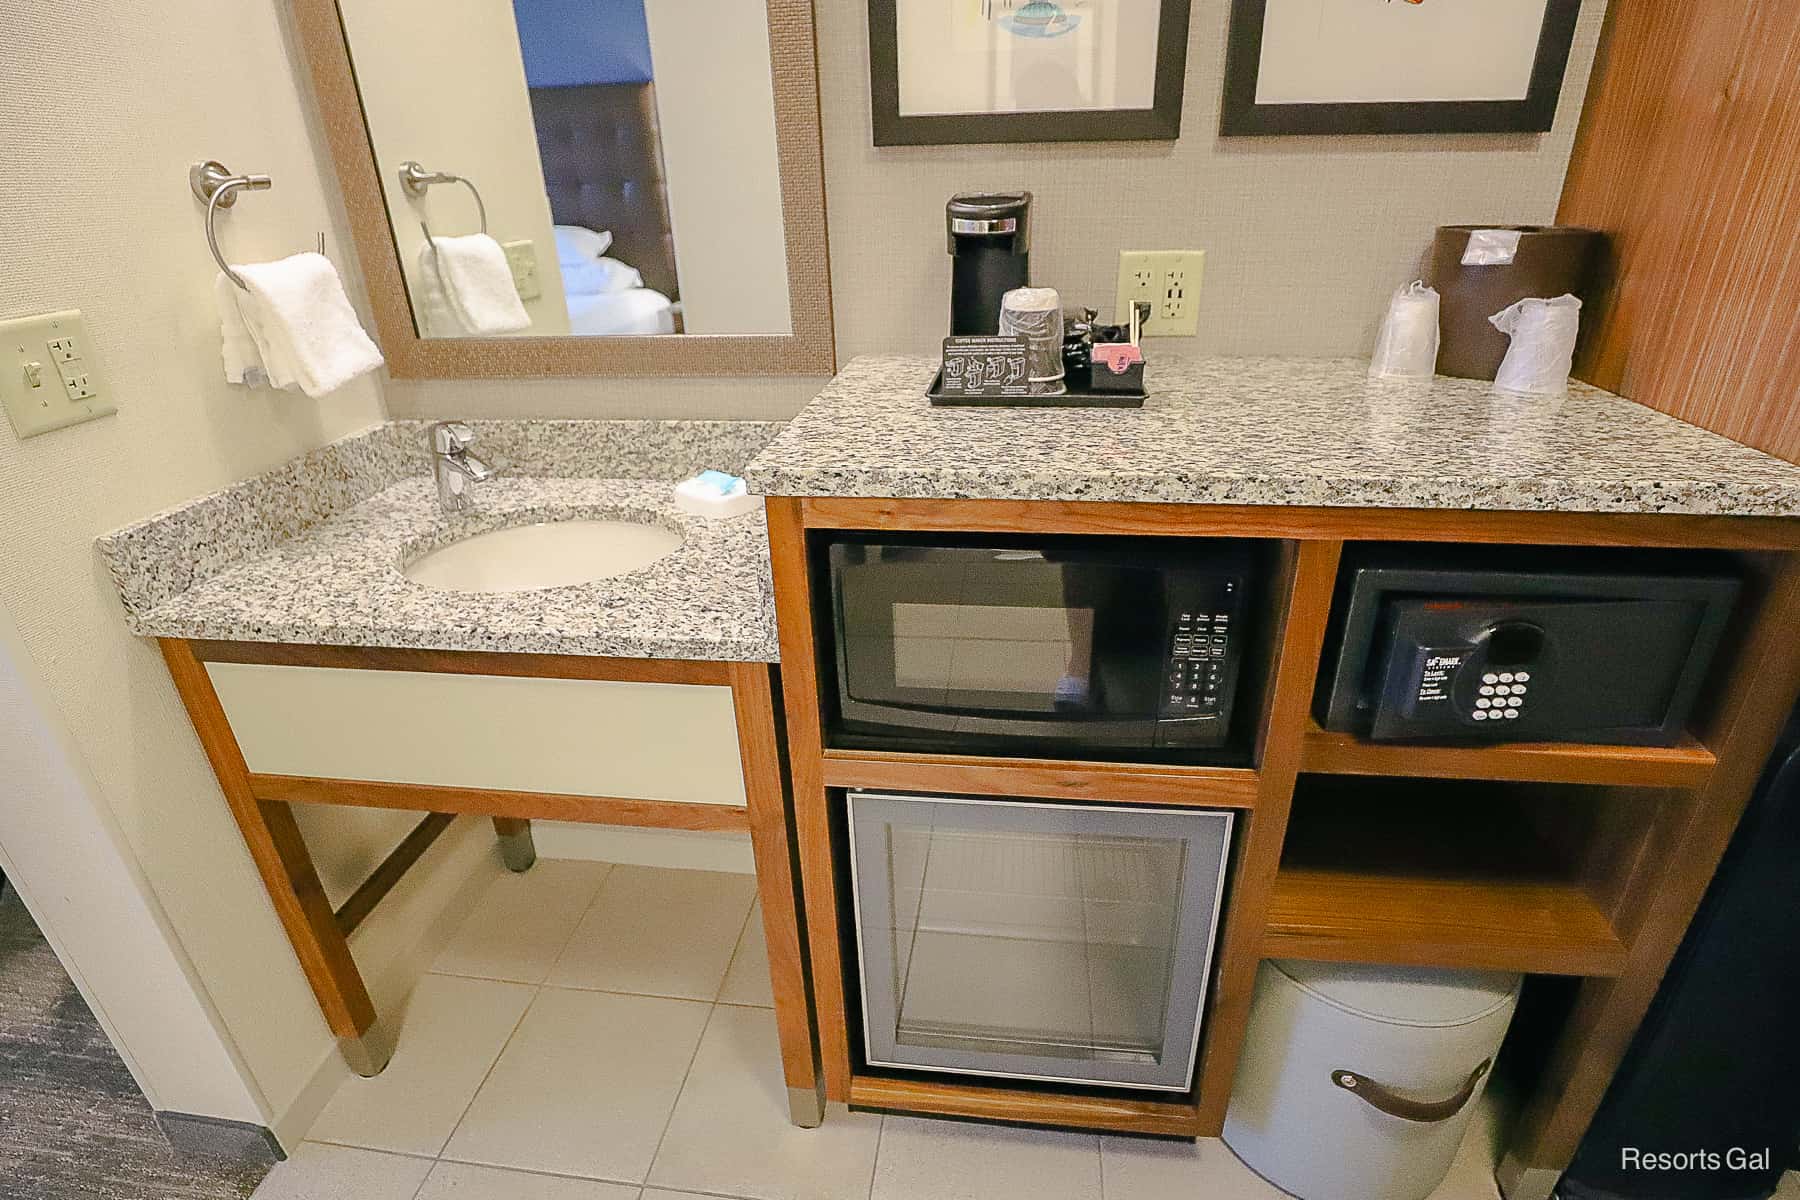 Amenities in the room include an extra sink, vanity, microwave, mini fridge and in-room safe. 